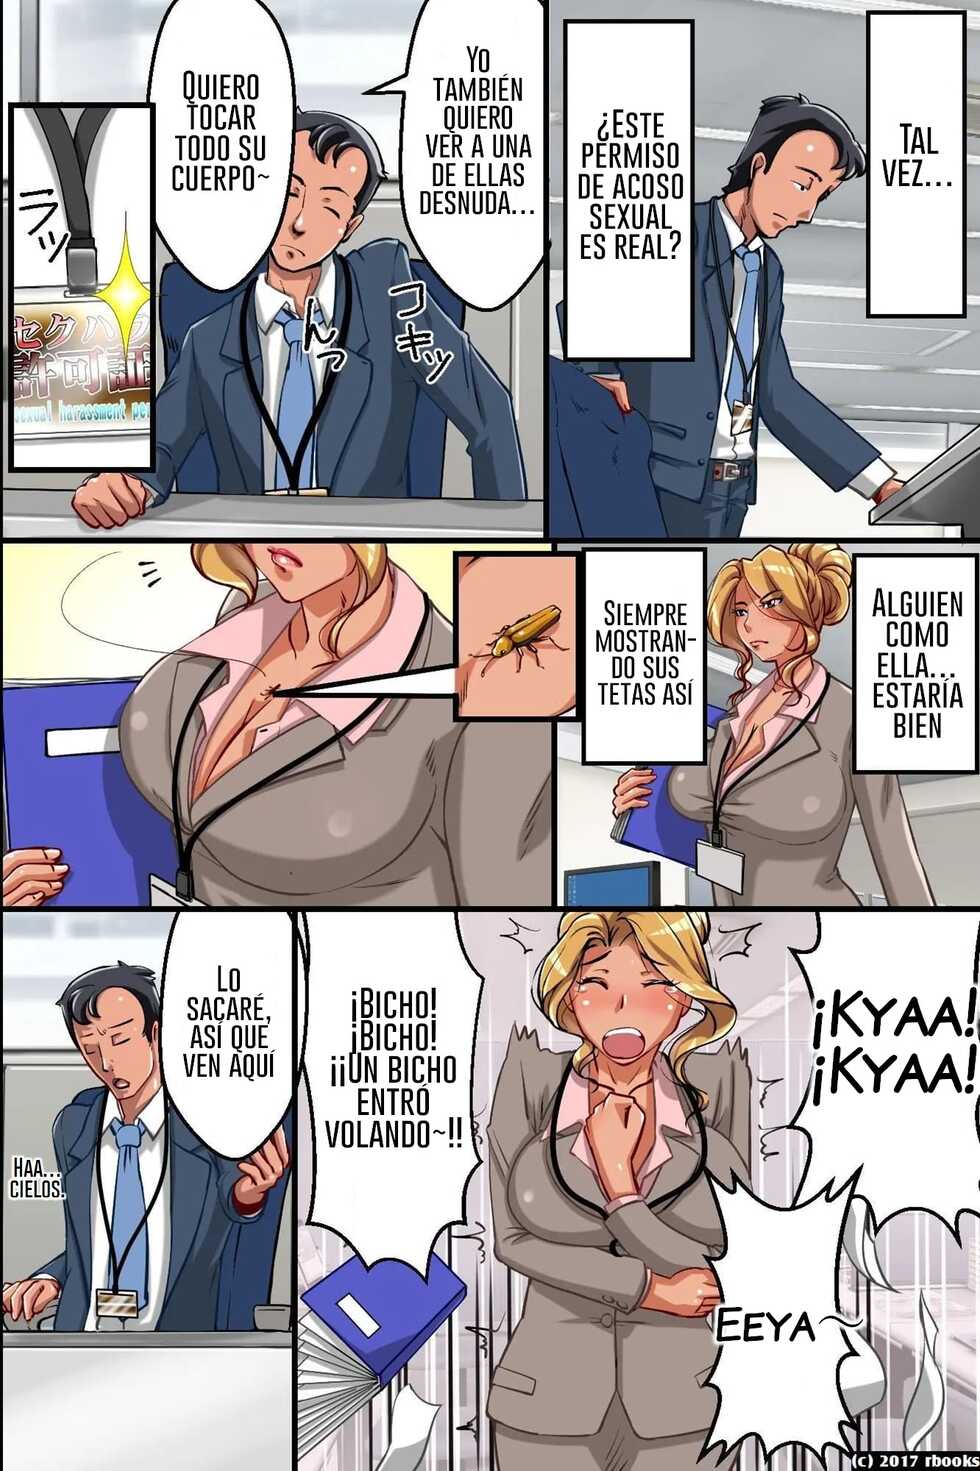 [Tetsukui] Sexual Harassment Permit Decisions Are Made By Inserting Raw Dick! (Spanish) - Page 8